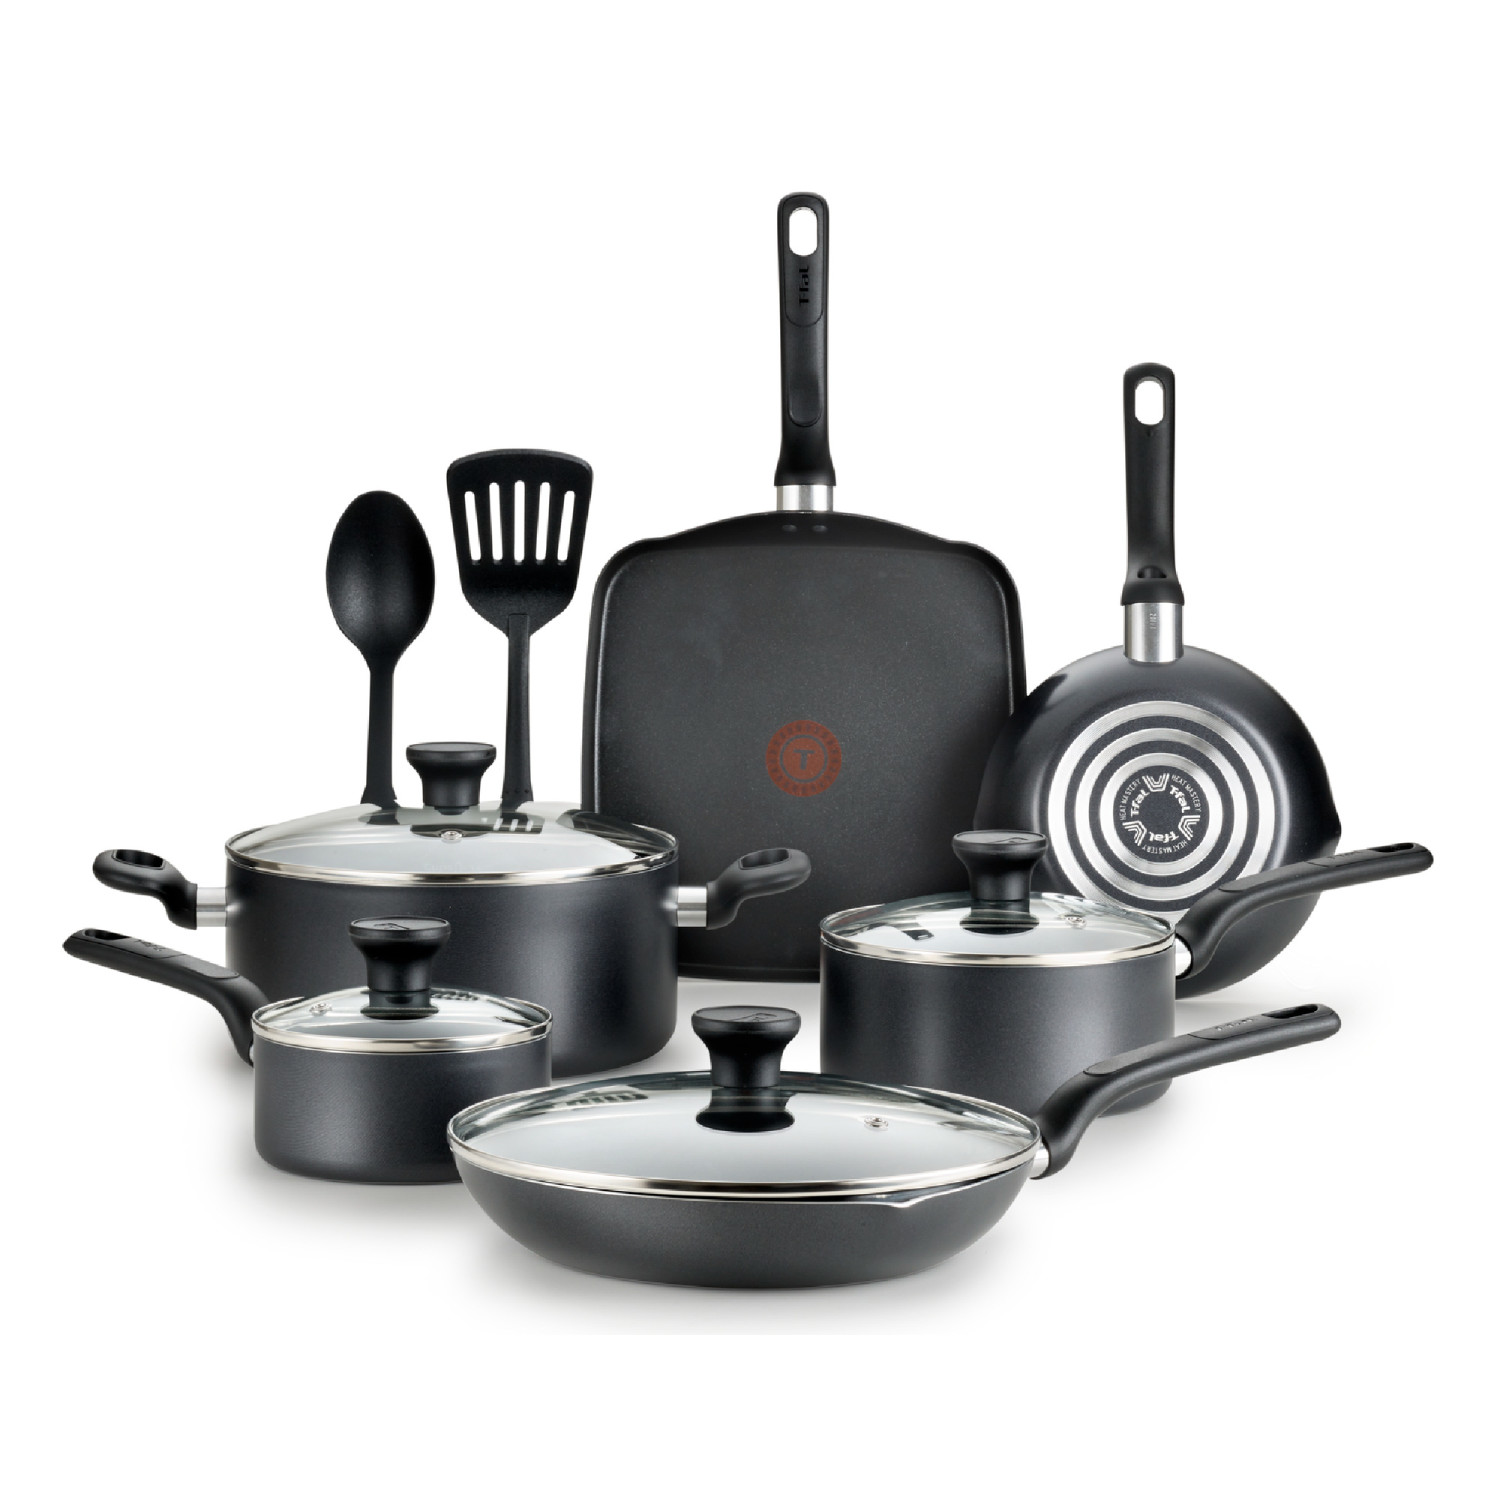 T-fal Easy Care 12-Piece Non-Stick Cookware Set, Pots and Pans, Grey - image 1 of 11